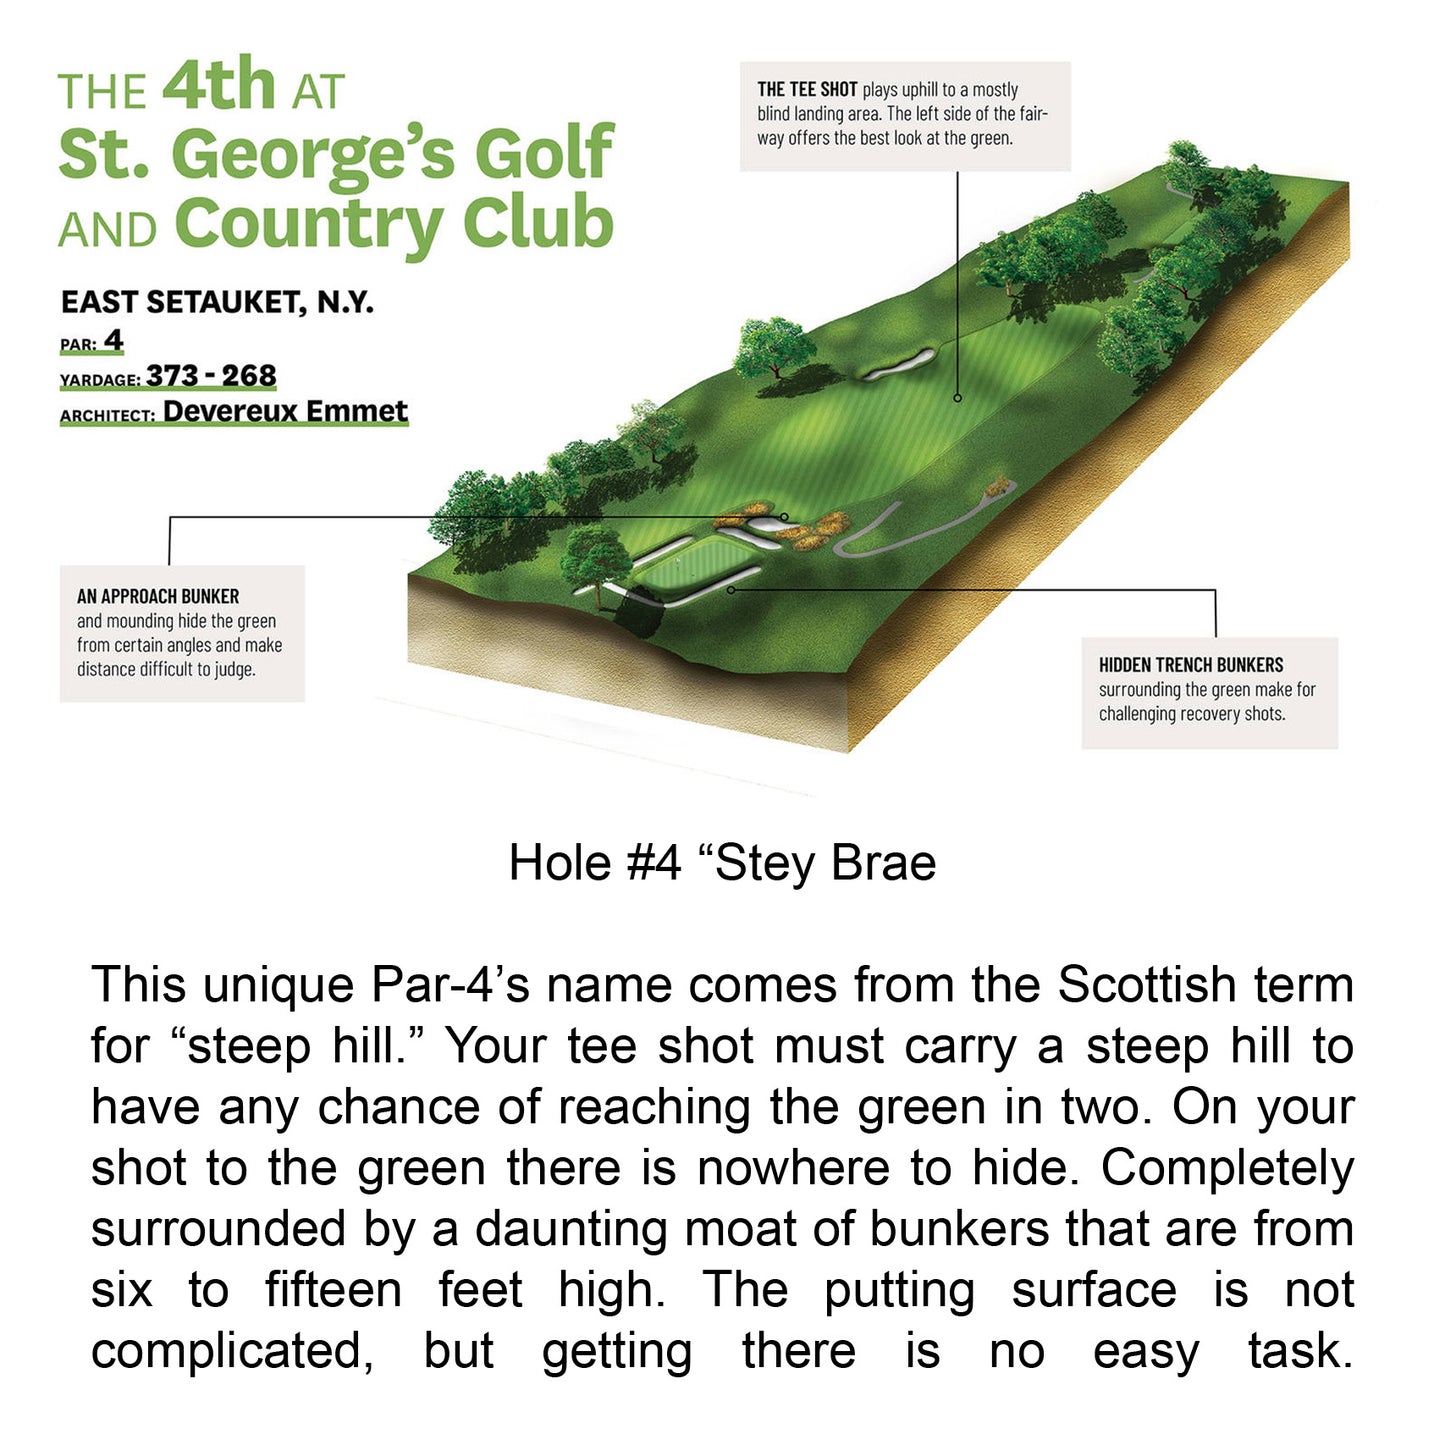 Master the Course: Hole-by-Hole Video Guide